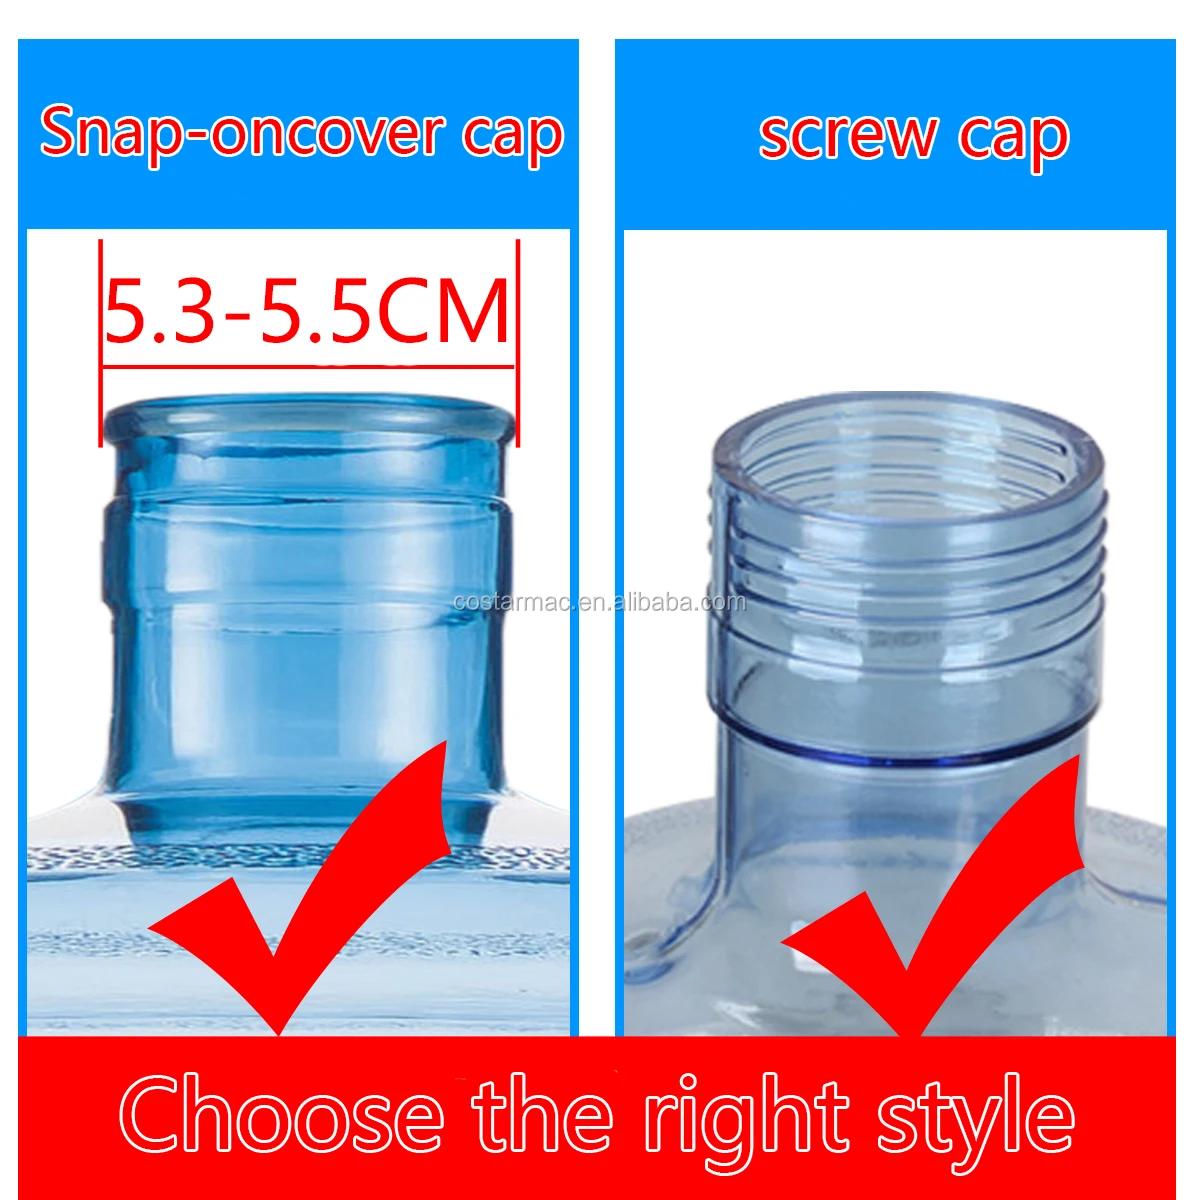 5 gallon barrelled water faucet Plastic water bottle valve snap-oncover cap and screw cap